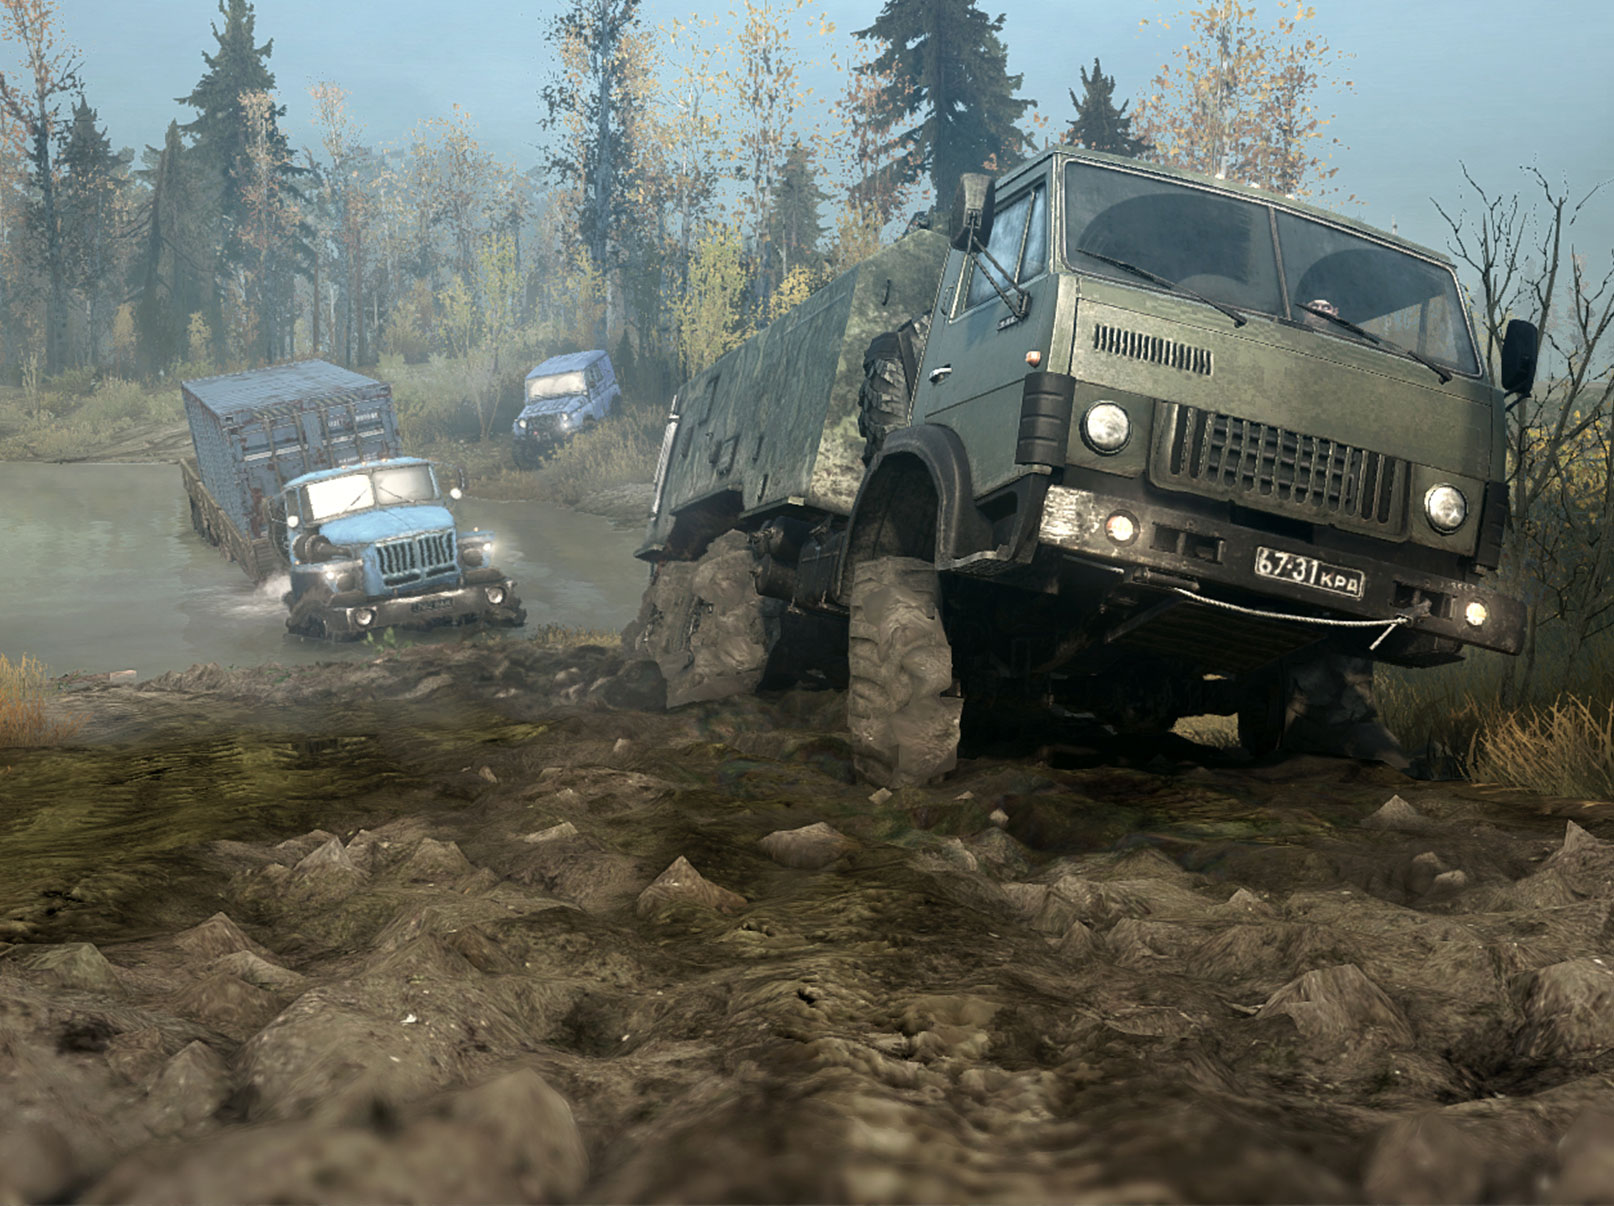 Expedition mudrunner nintendo. Spin Tires MUDRUNNER ps4. MUDRUNNER Xbox 360. Игра SPINTIRES MUDRUNNER 2. Spin Tires MUDRUNNER Xbox 360.